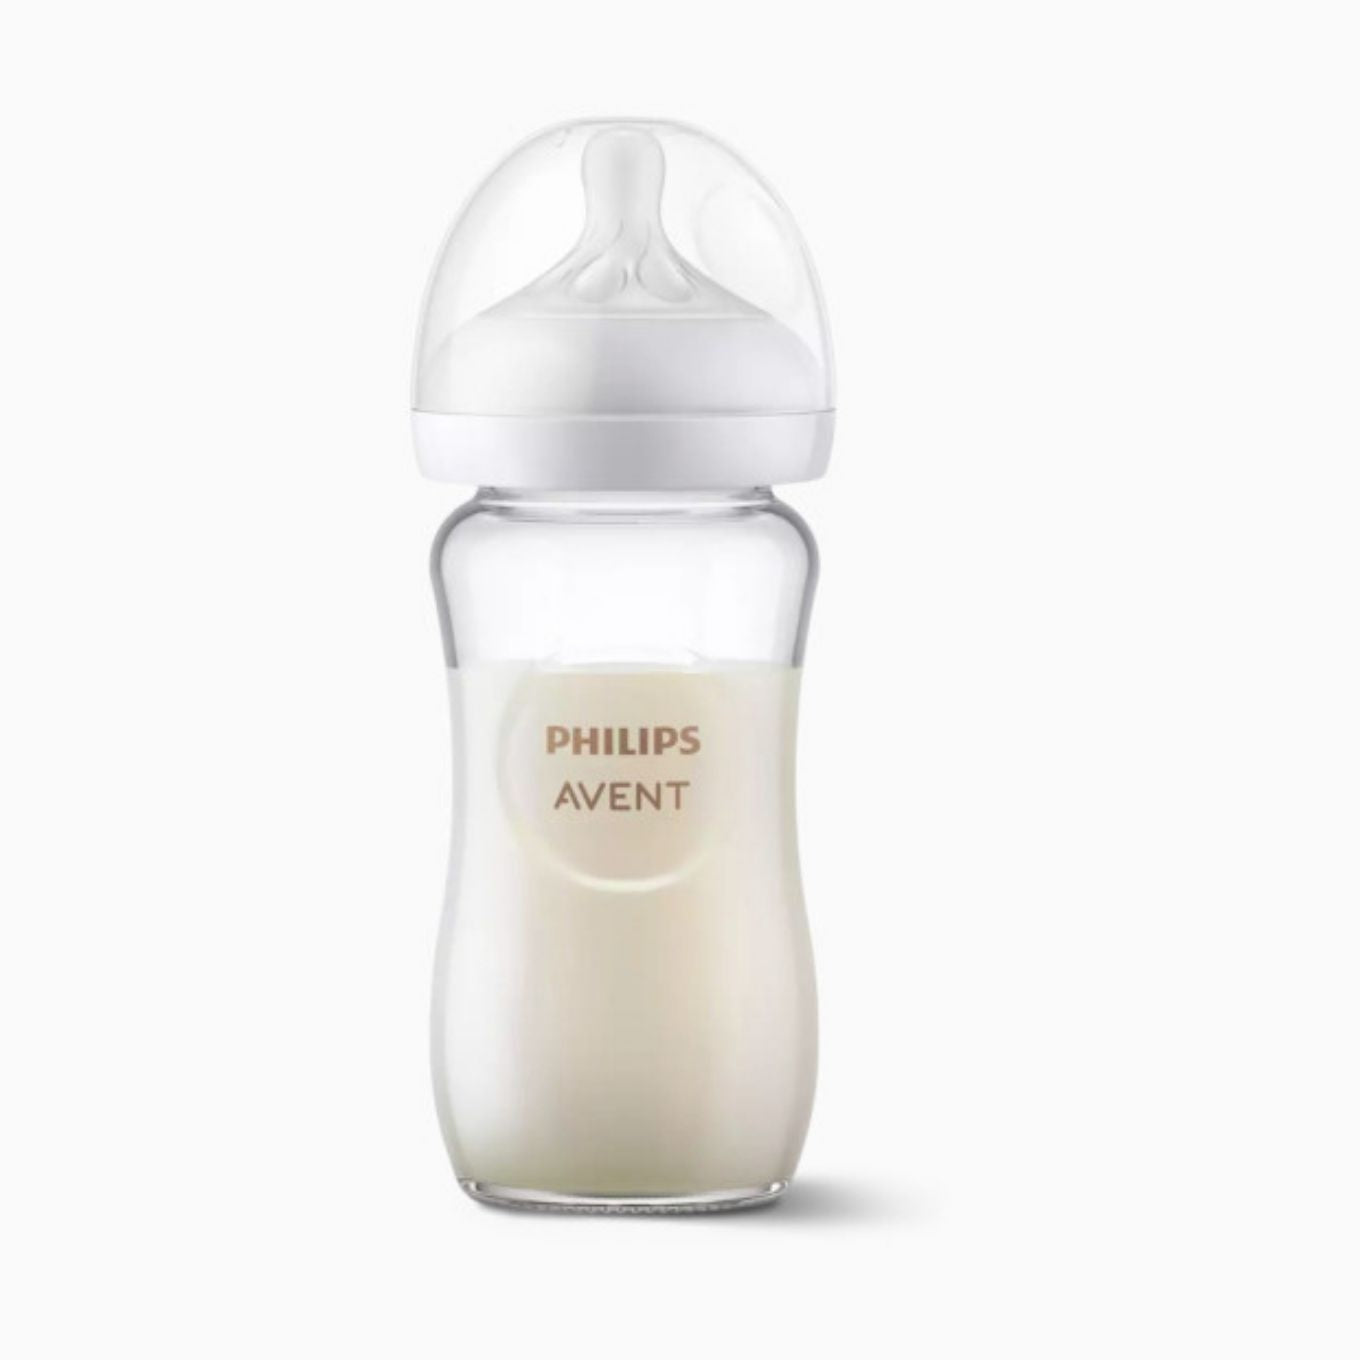 Image of Philips Avent Glass Natural Baby Bottle with Natural Response Nipple